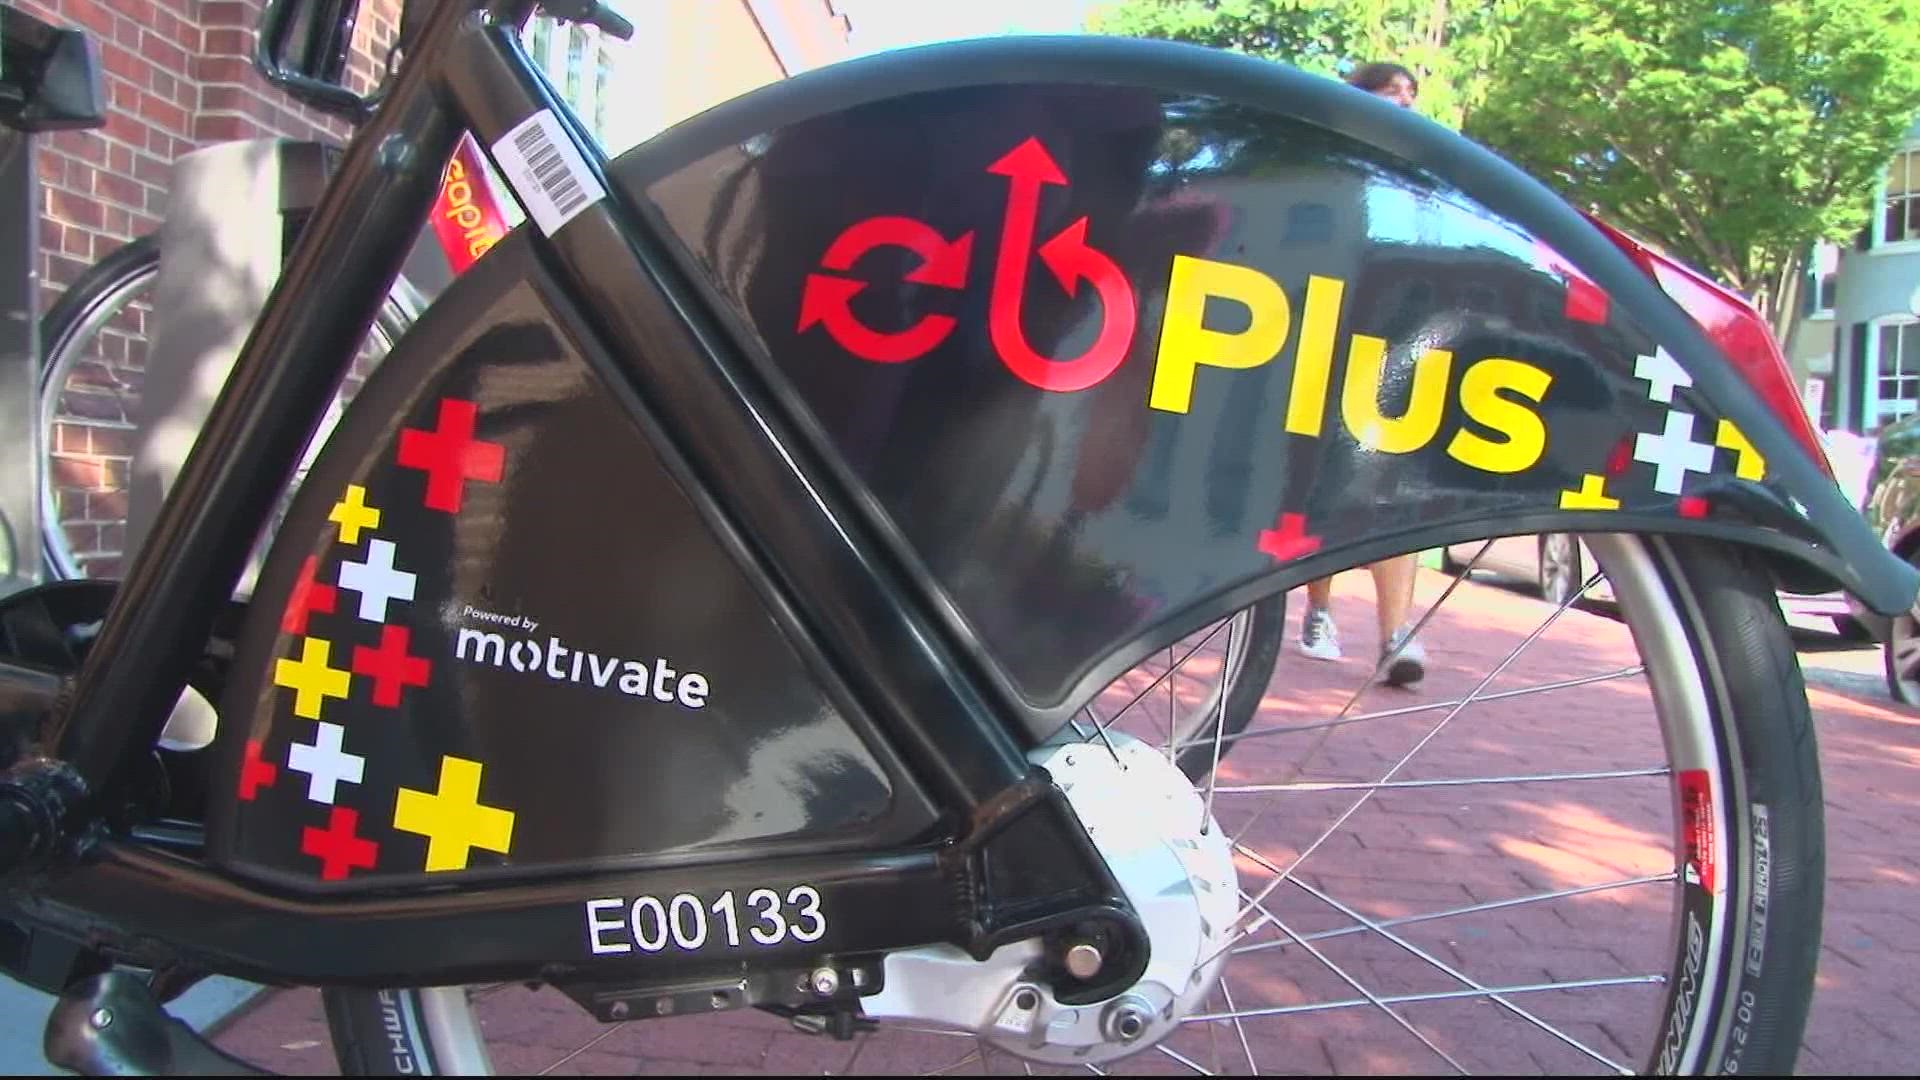 A DC councilmember has proposed a bill to offer rebates to residents and businesses to make buying an electric bike more affordable.